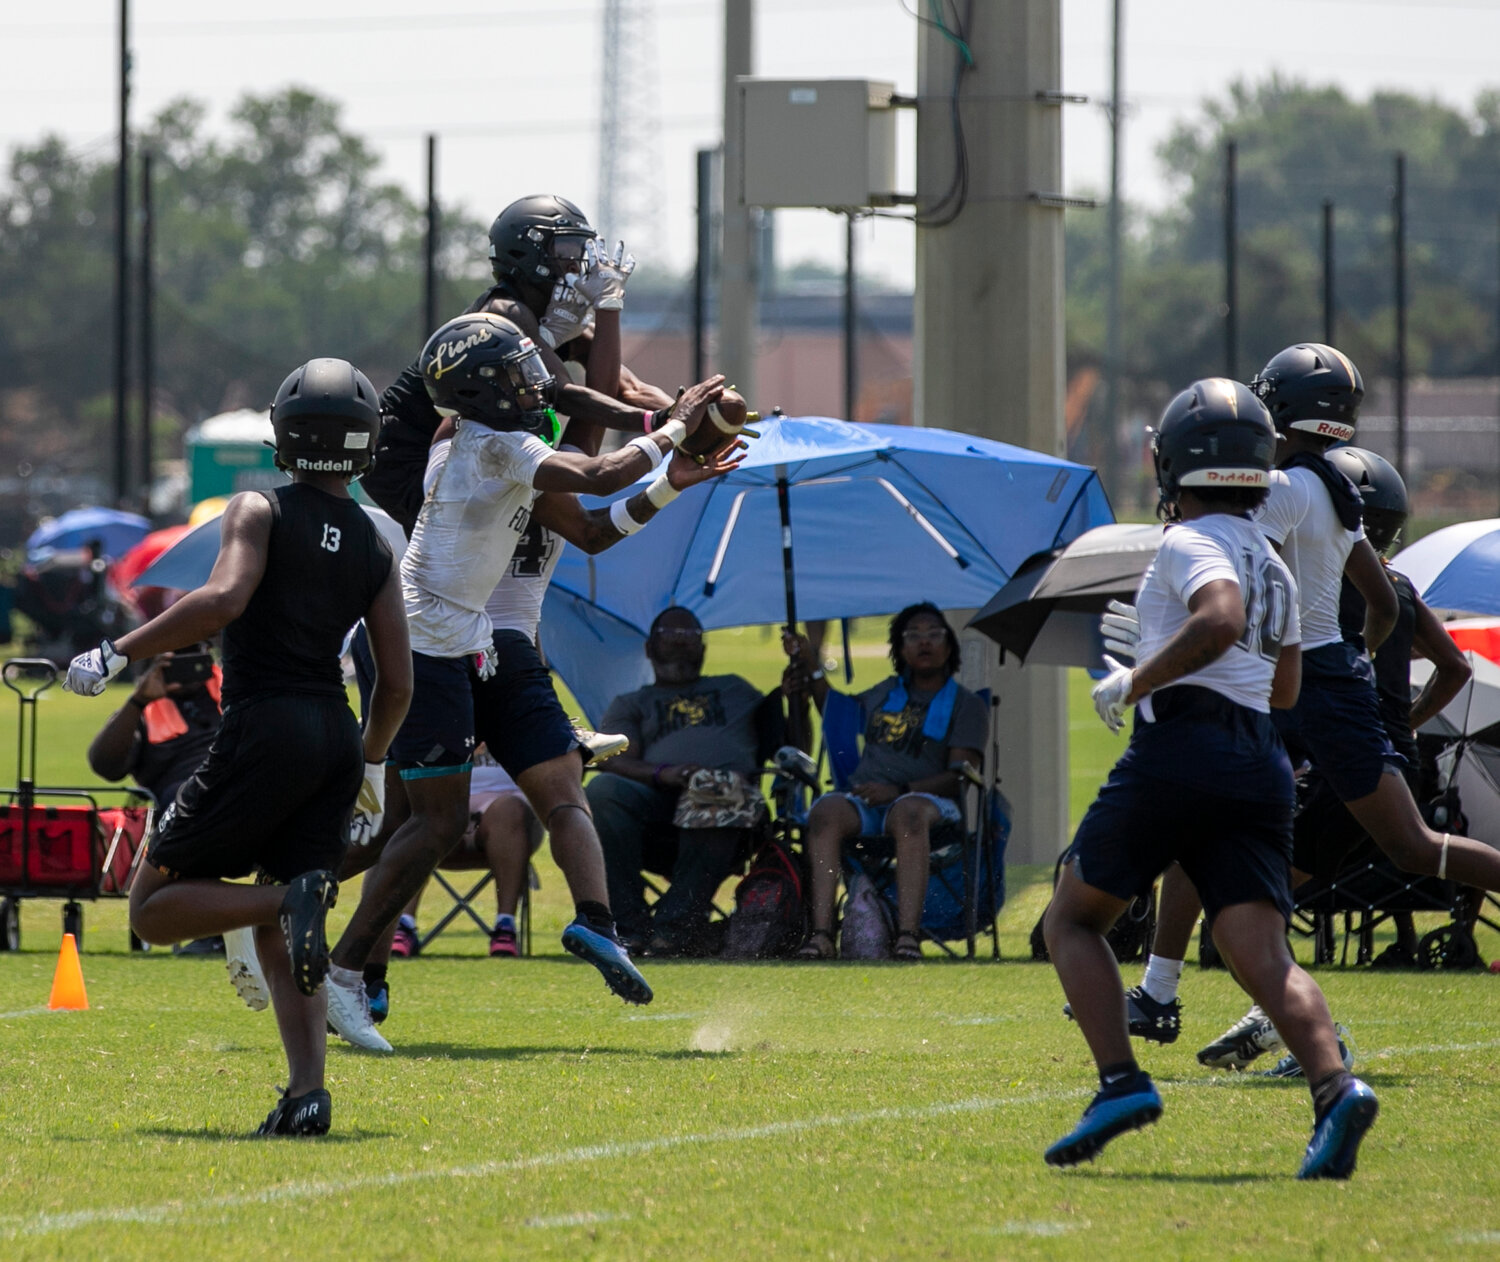 Foley senior Perry Thompson leaps in for a game-sealing interception to advance the Lions past the McAdory Yellow Jackets in the quarterfinals of the championship bracket at Thursday’s Foley 7-on-7 Showdown.